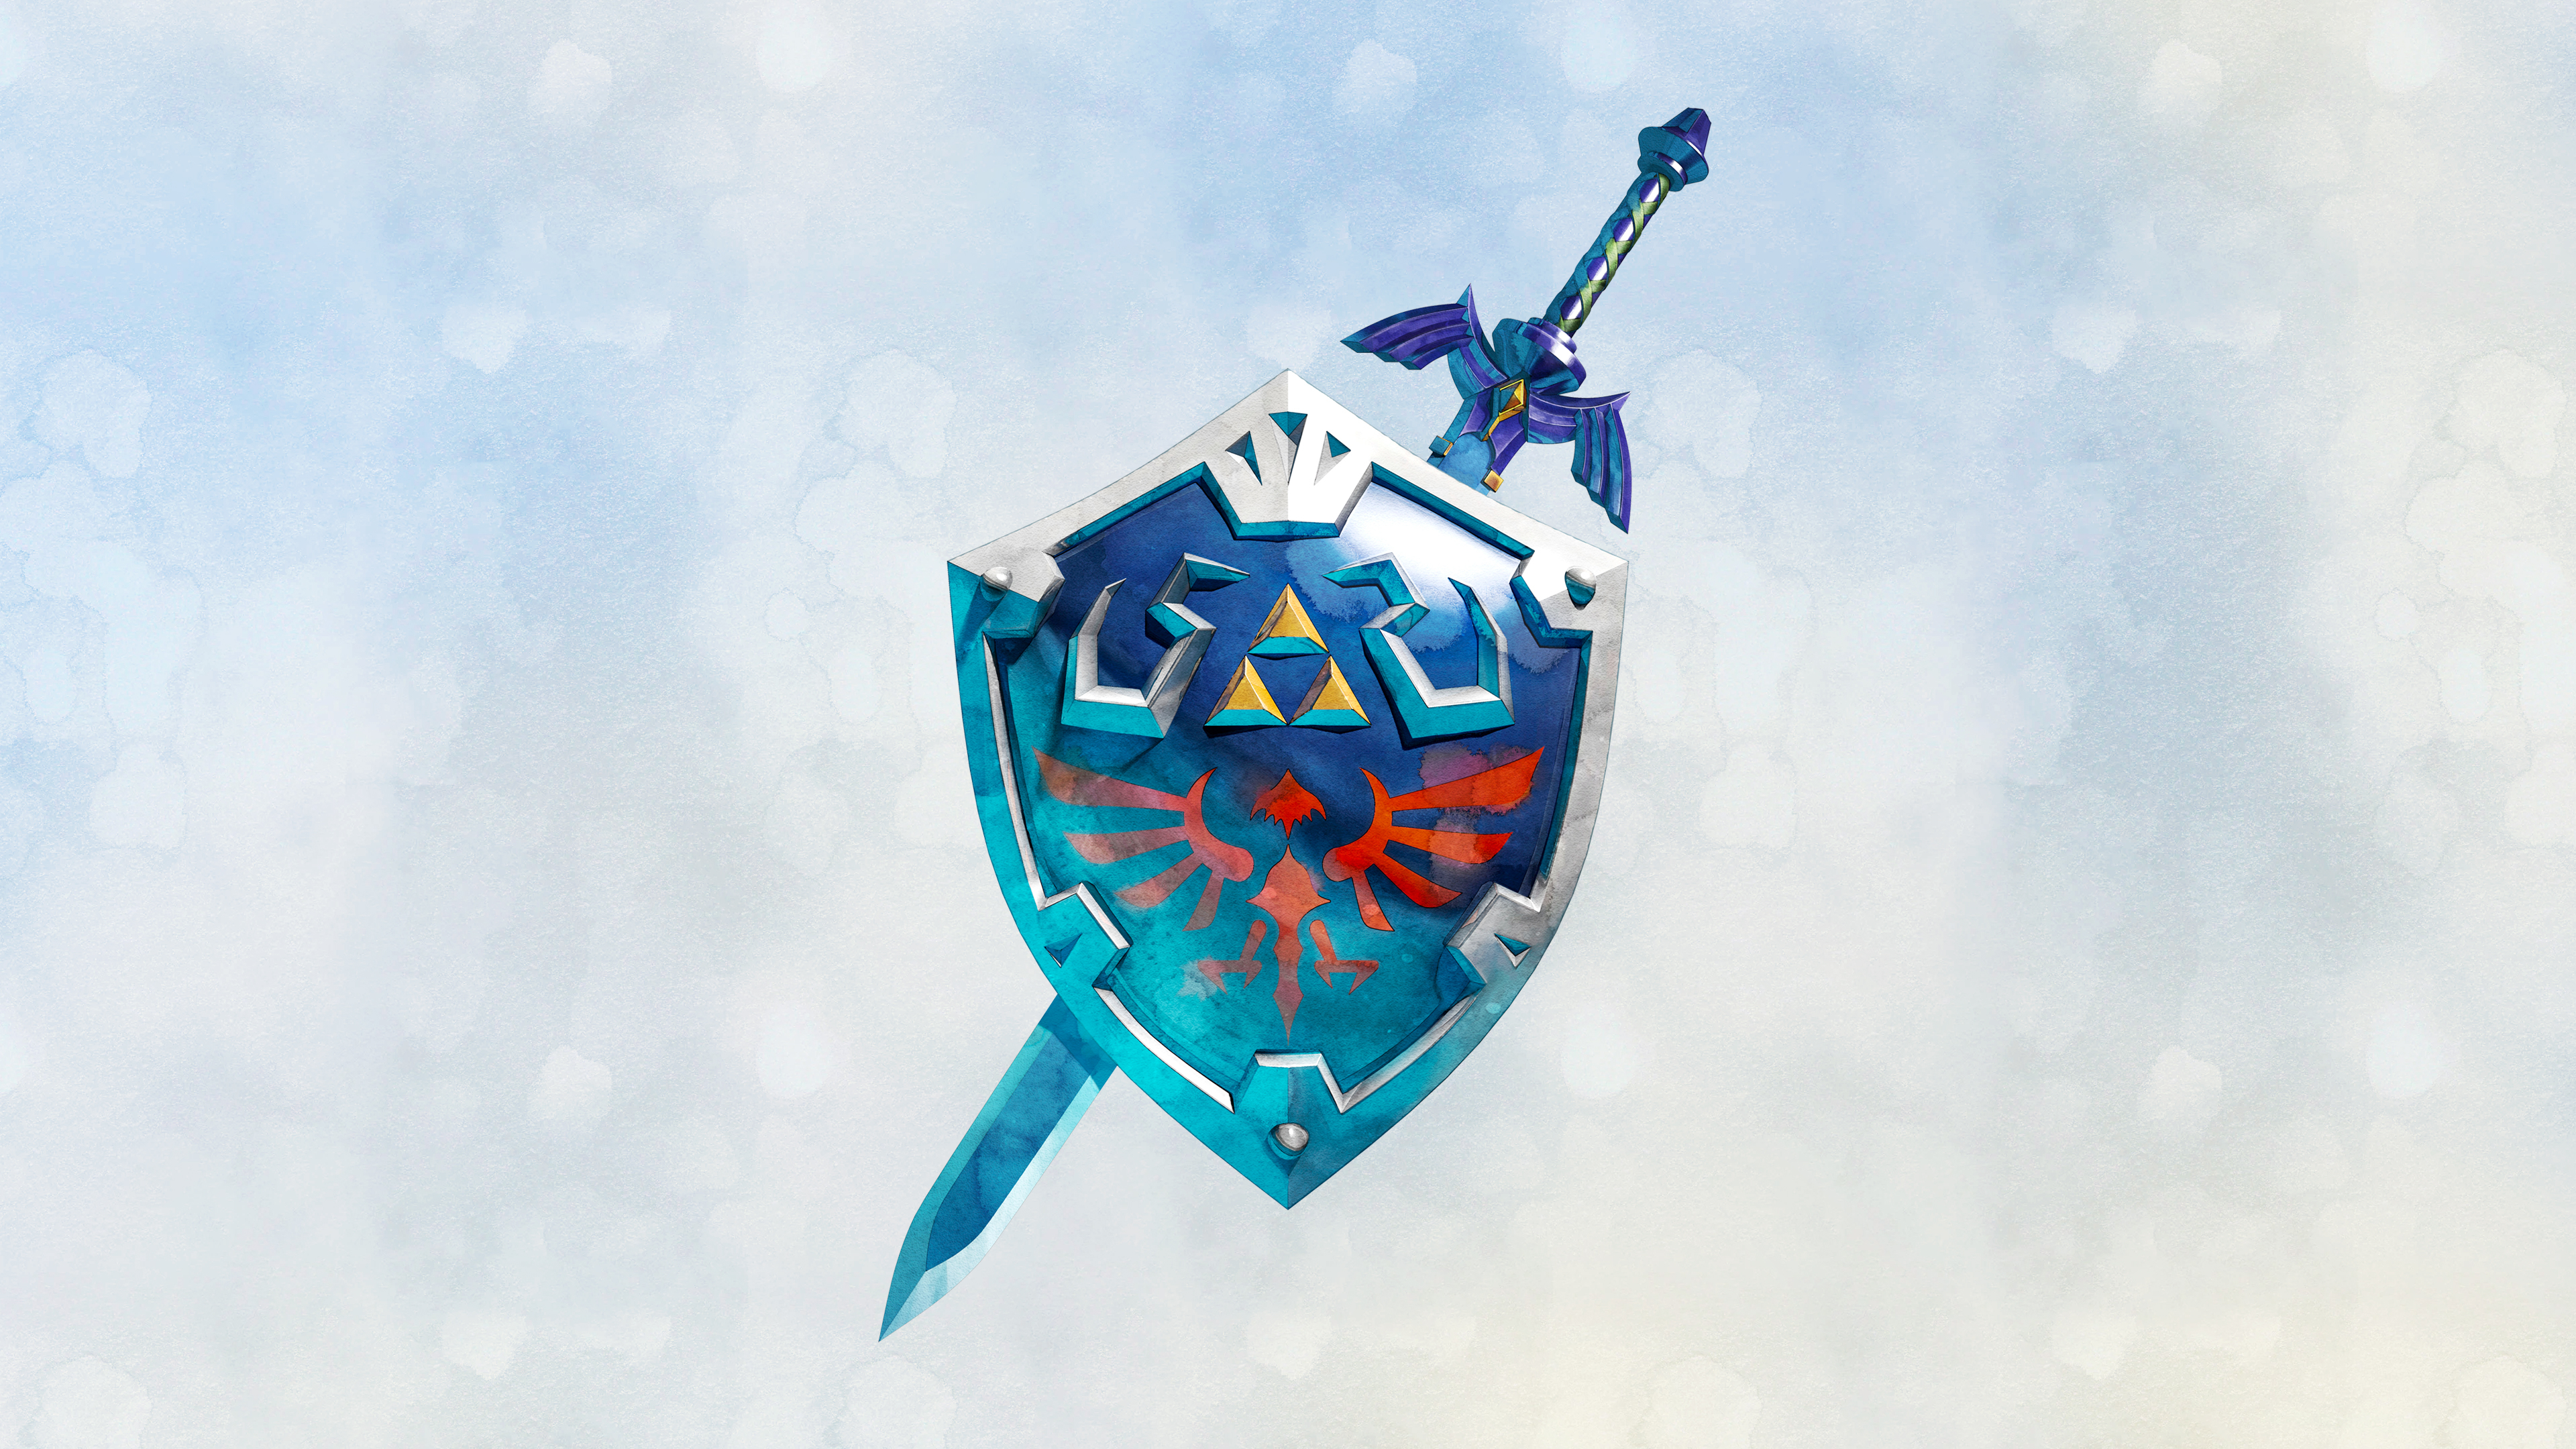 3840x2160 The Legend of Zelda: Skyward Sword Hylian Shield and Master Sword Wallpaper Cat with Monocle